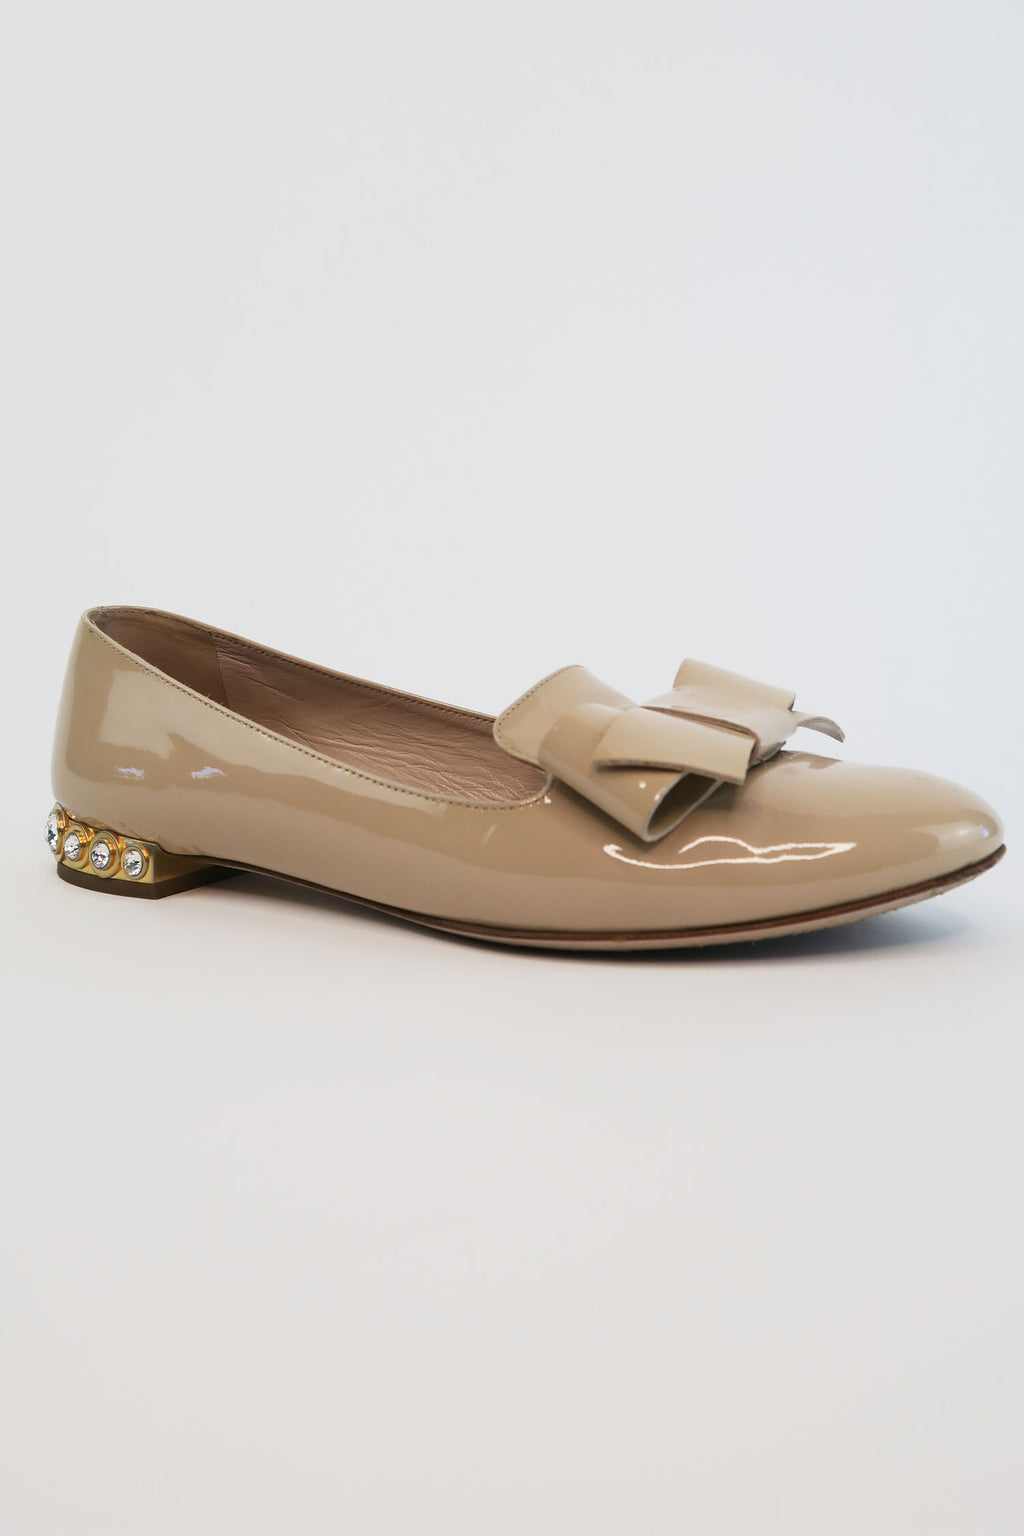 Miu Miu Patent Leather Bow Accents Loafers sz 37